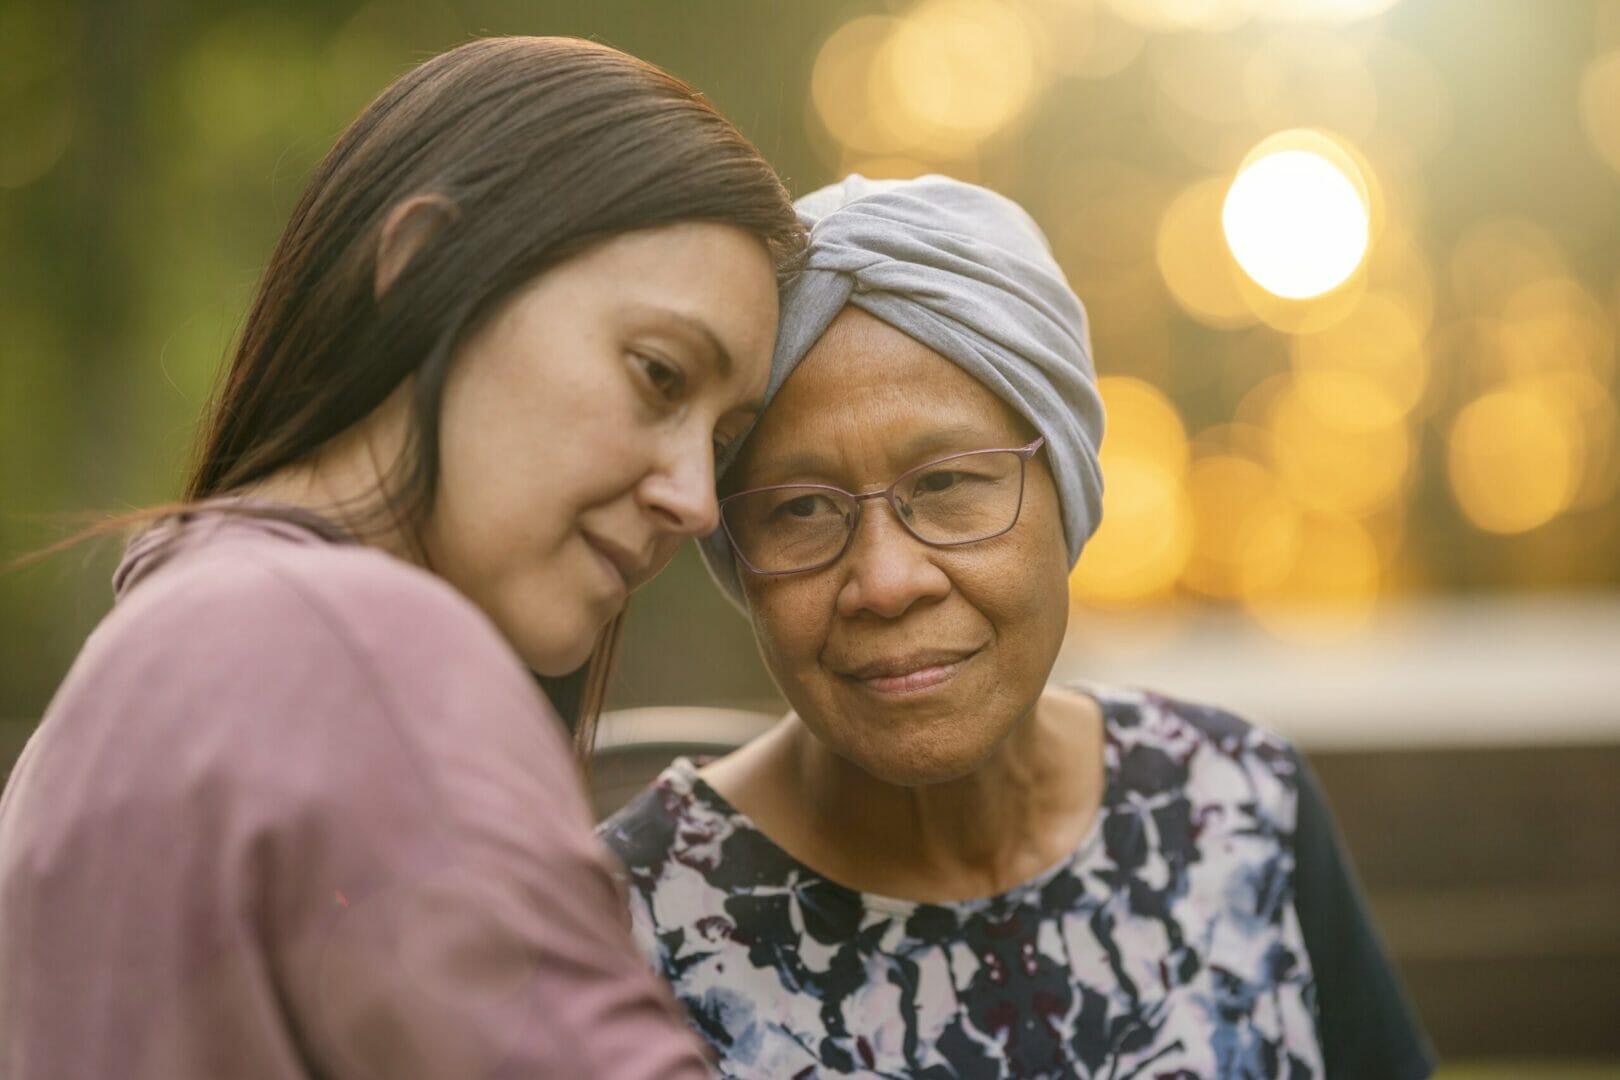 Mixed race woman comforting her ill mother